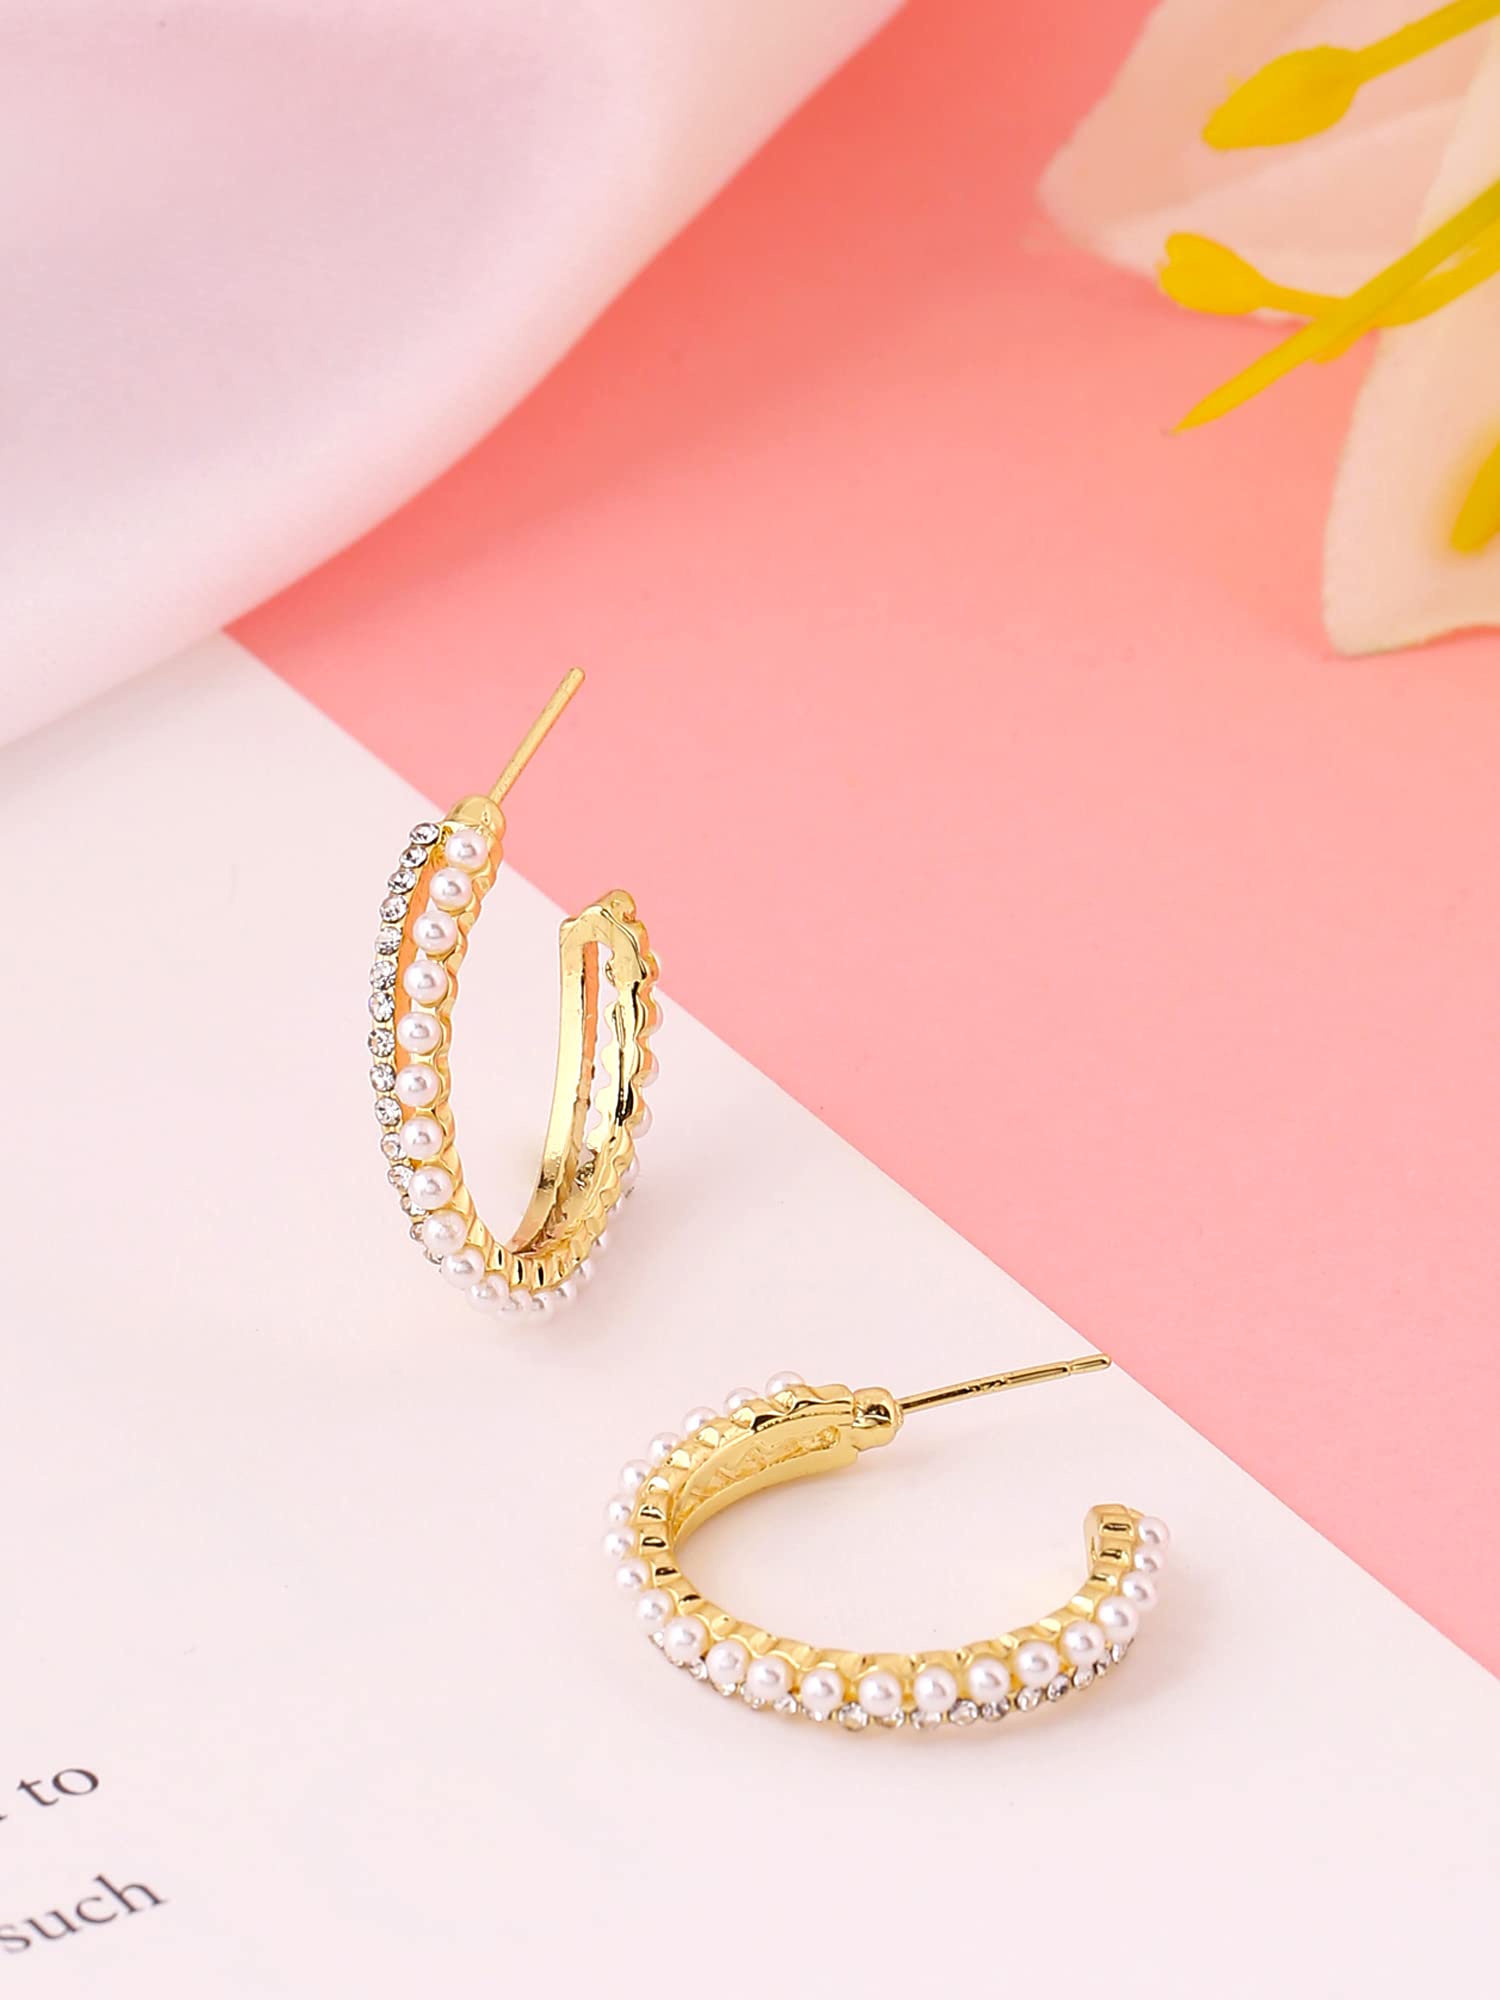 Yellow Chimes Earrings for Women and Girls Hoop Earrings for Girls | Gold Toned Hoop Earrings | Birthday Gift for girls and women Anniversary Gift for Wife